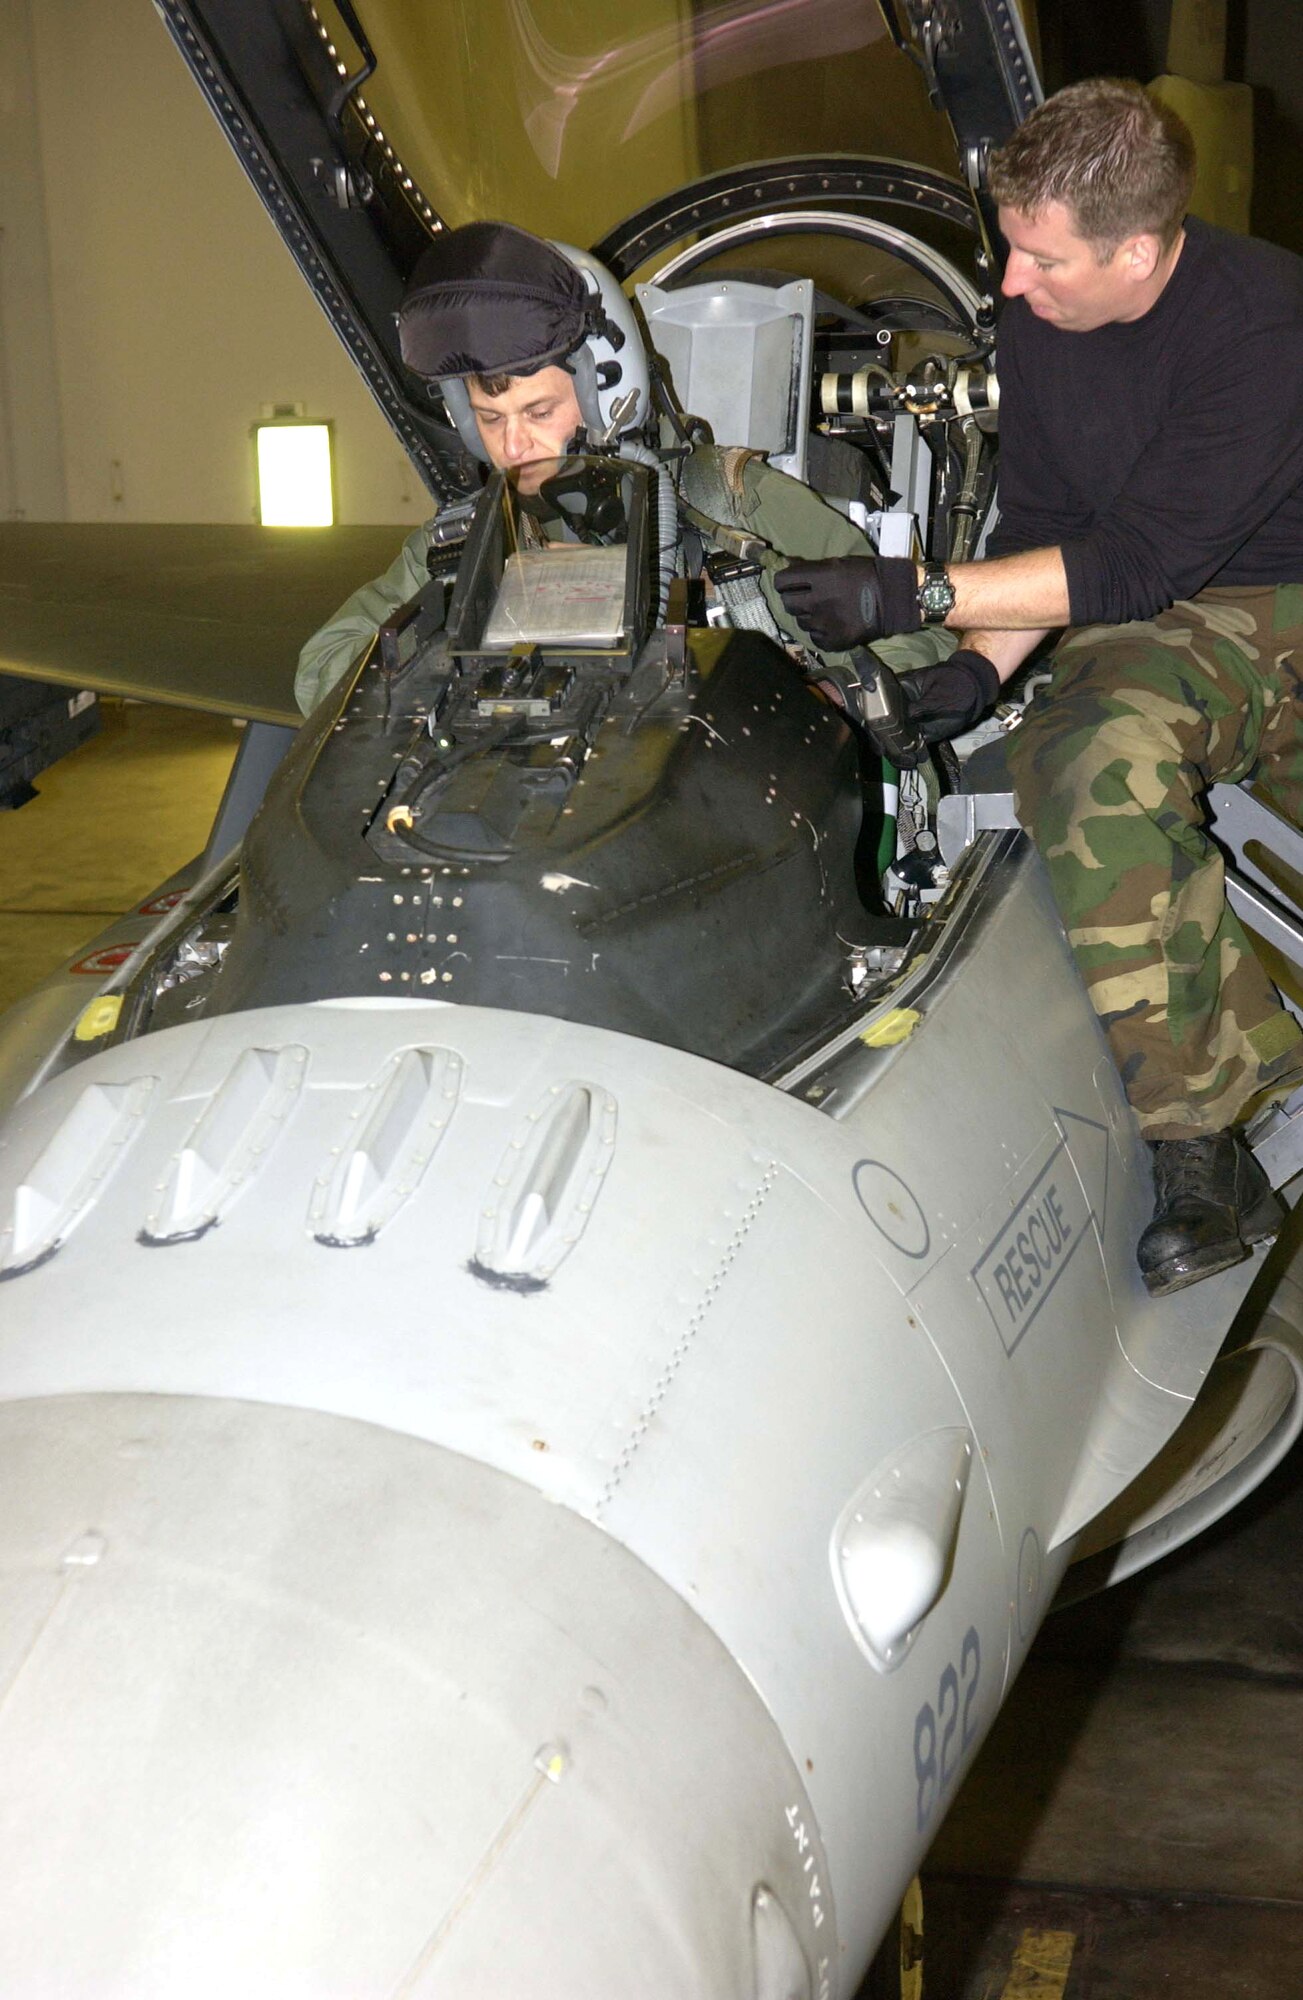 Lt. Col. Andrew Dembosky climbs into his F-16 Fighting Falcon as Crew Chief Staff Sgt. Robert Parsons helps with the preflight preparations Nov. 14 at Misawa Air Base, Japan. Colonel Dembosky is the 35th Fighter Wing inspector general. (U.S. Air Force photo/Senior Airman Robert Barnett)